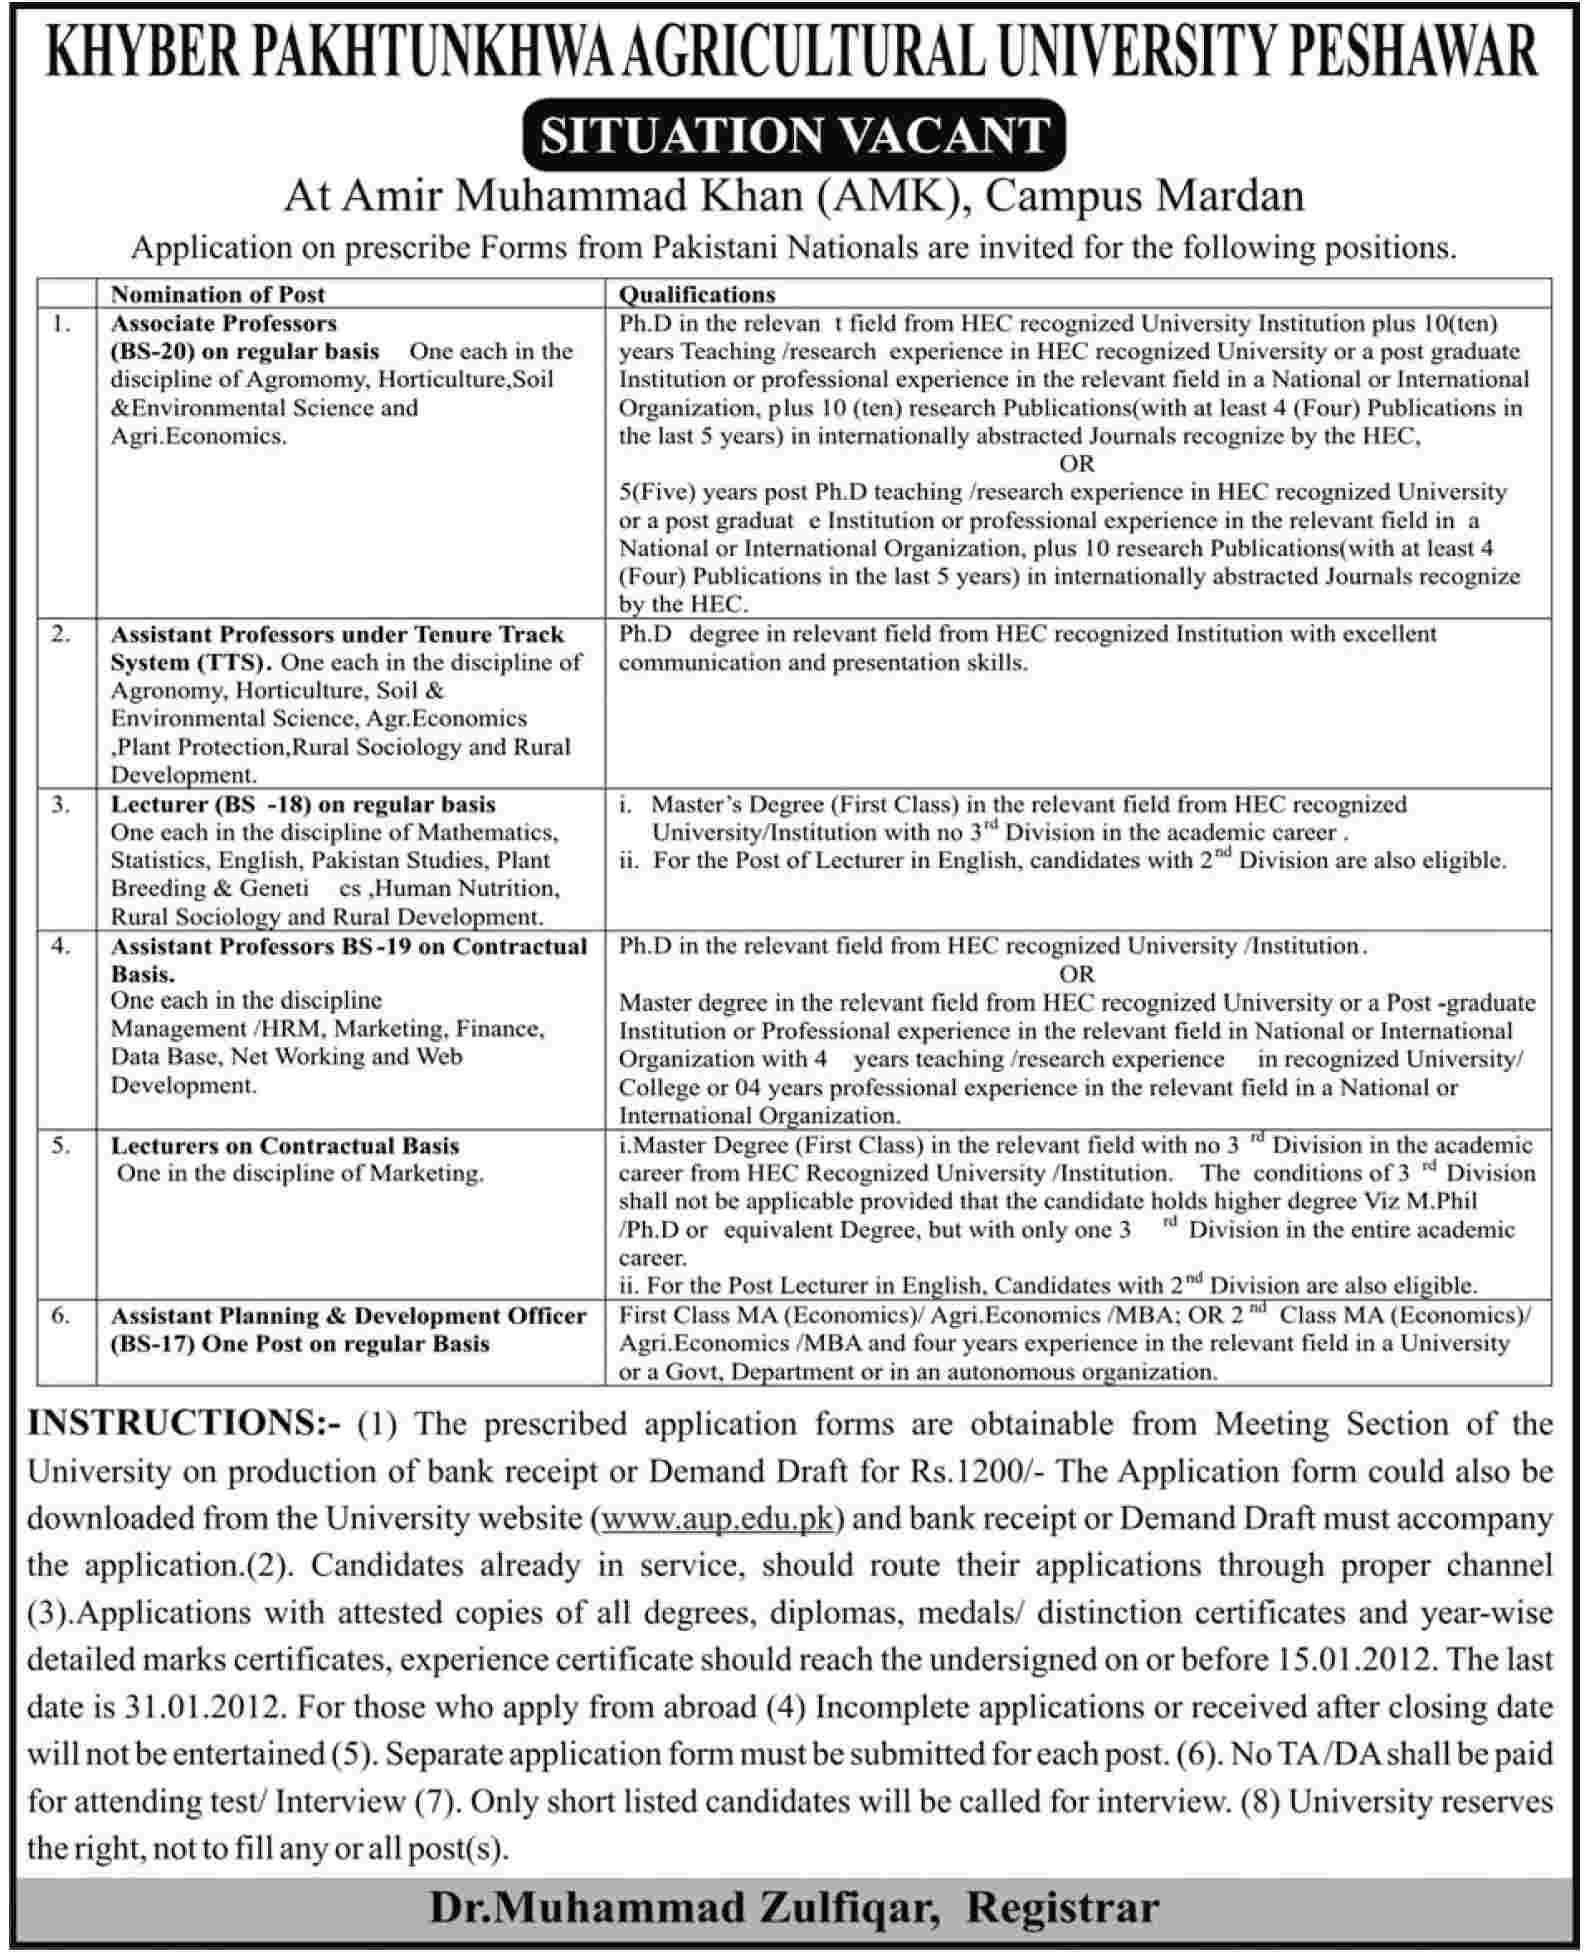 KPK Agriculture University Peshawar Required Faculty